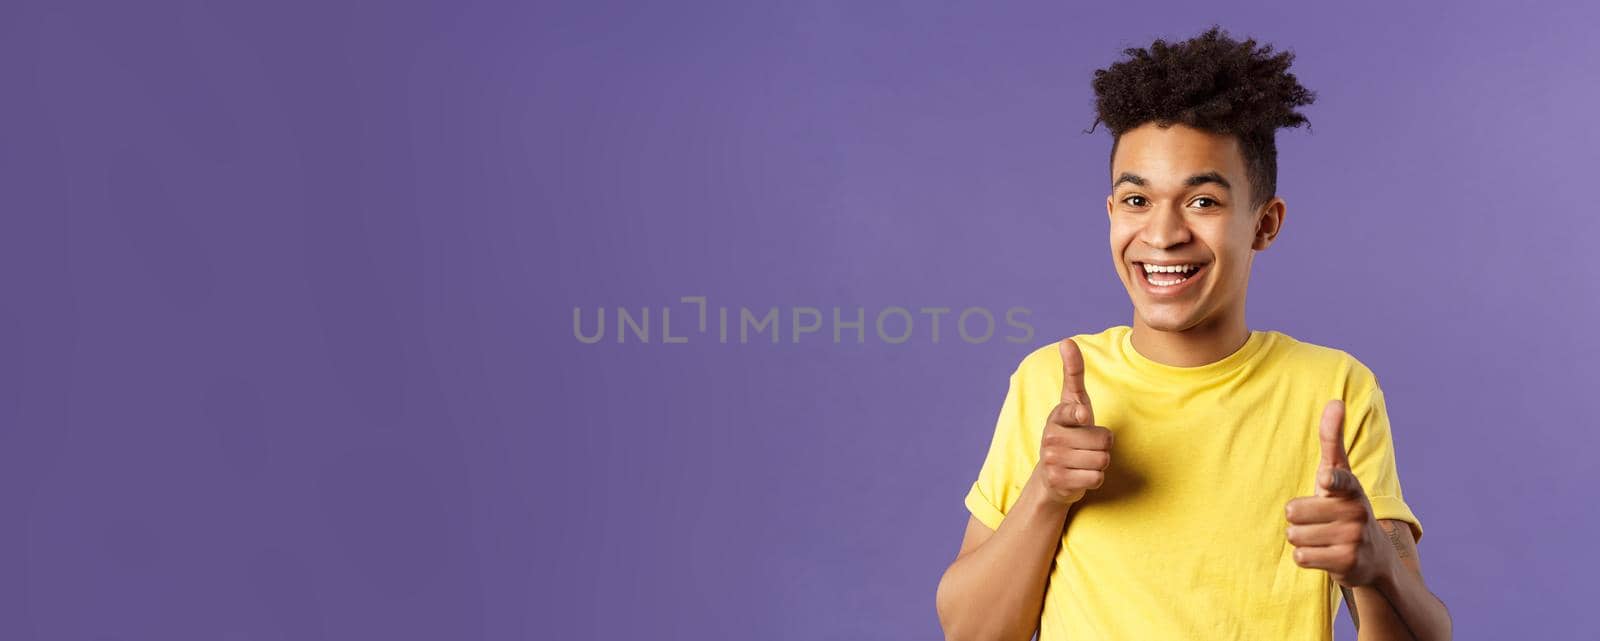 Believe in you. Portrait of cheerful young optimistic guy encuraging to keep going, pointing fingers at camera with happy upbeat smile, picking someone, praising or complimanting.